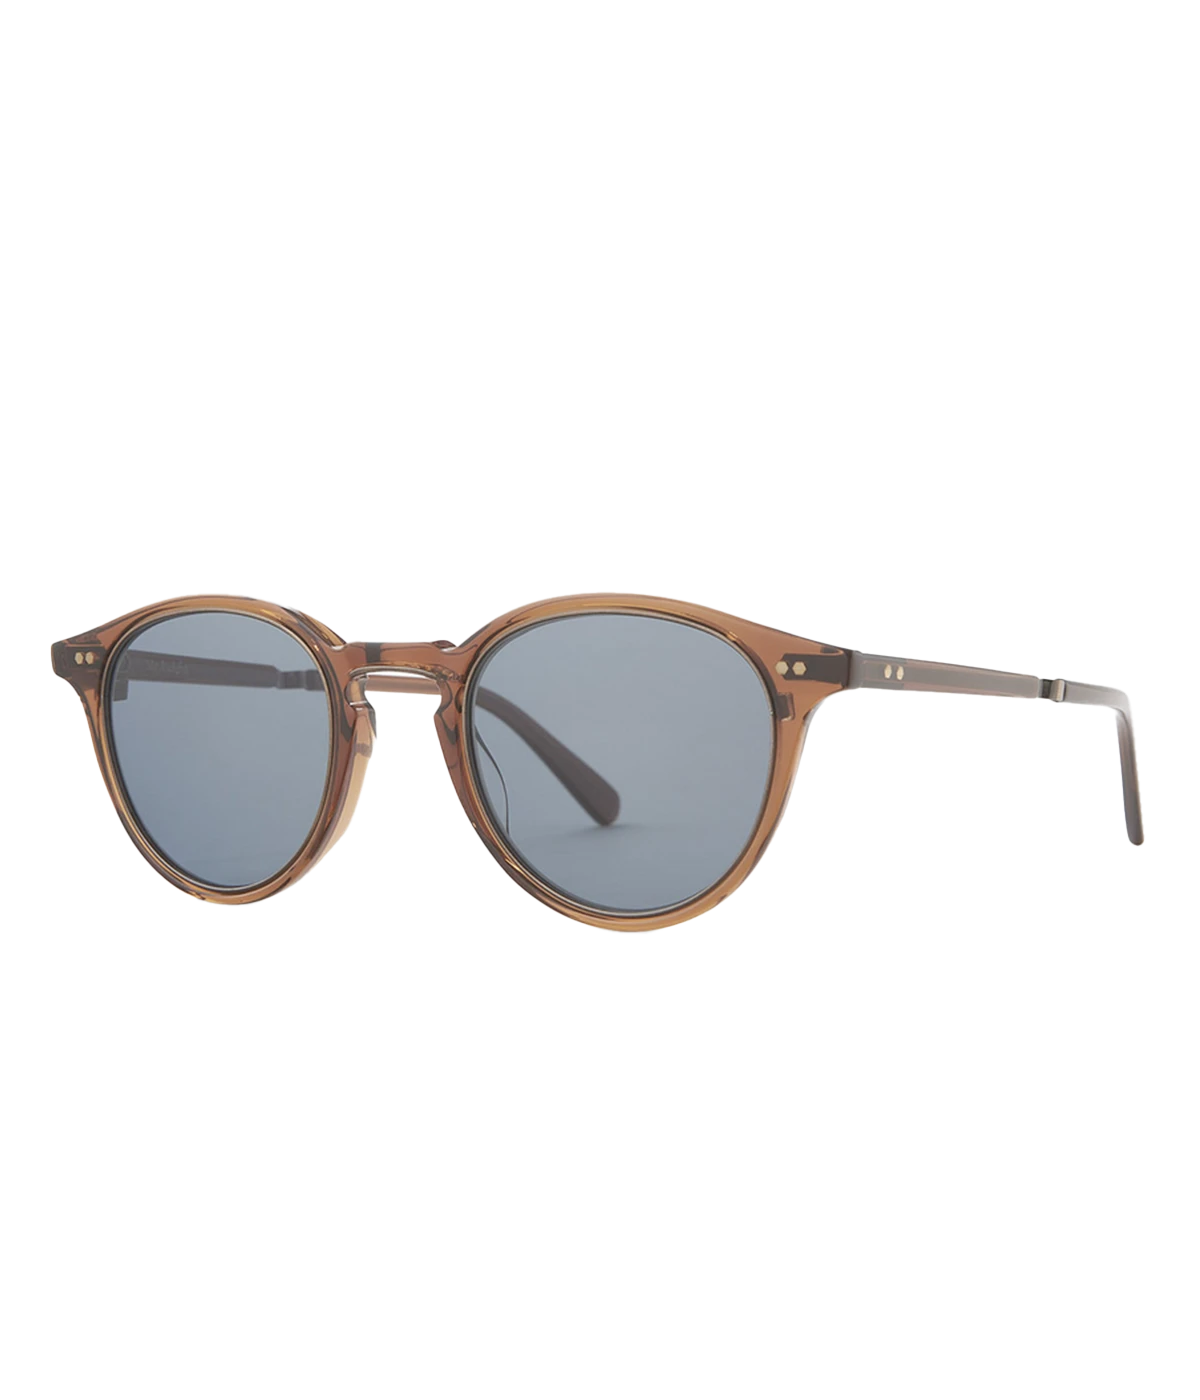 Marmont II S 48 Sunglasses in Antique Gold & Blue Opal